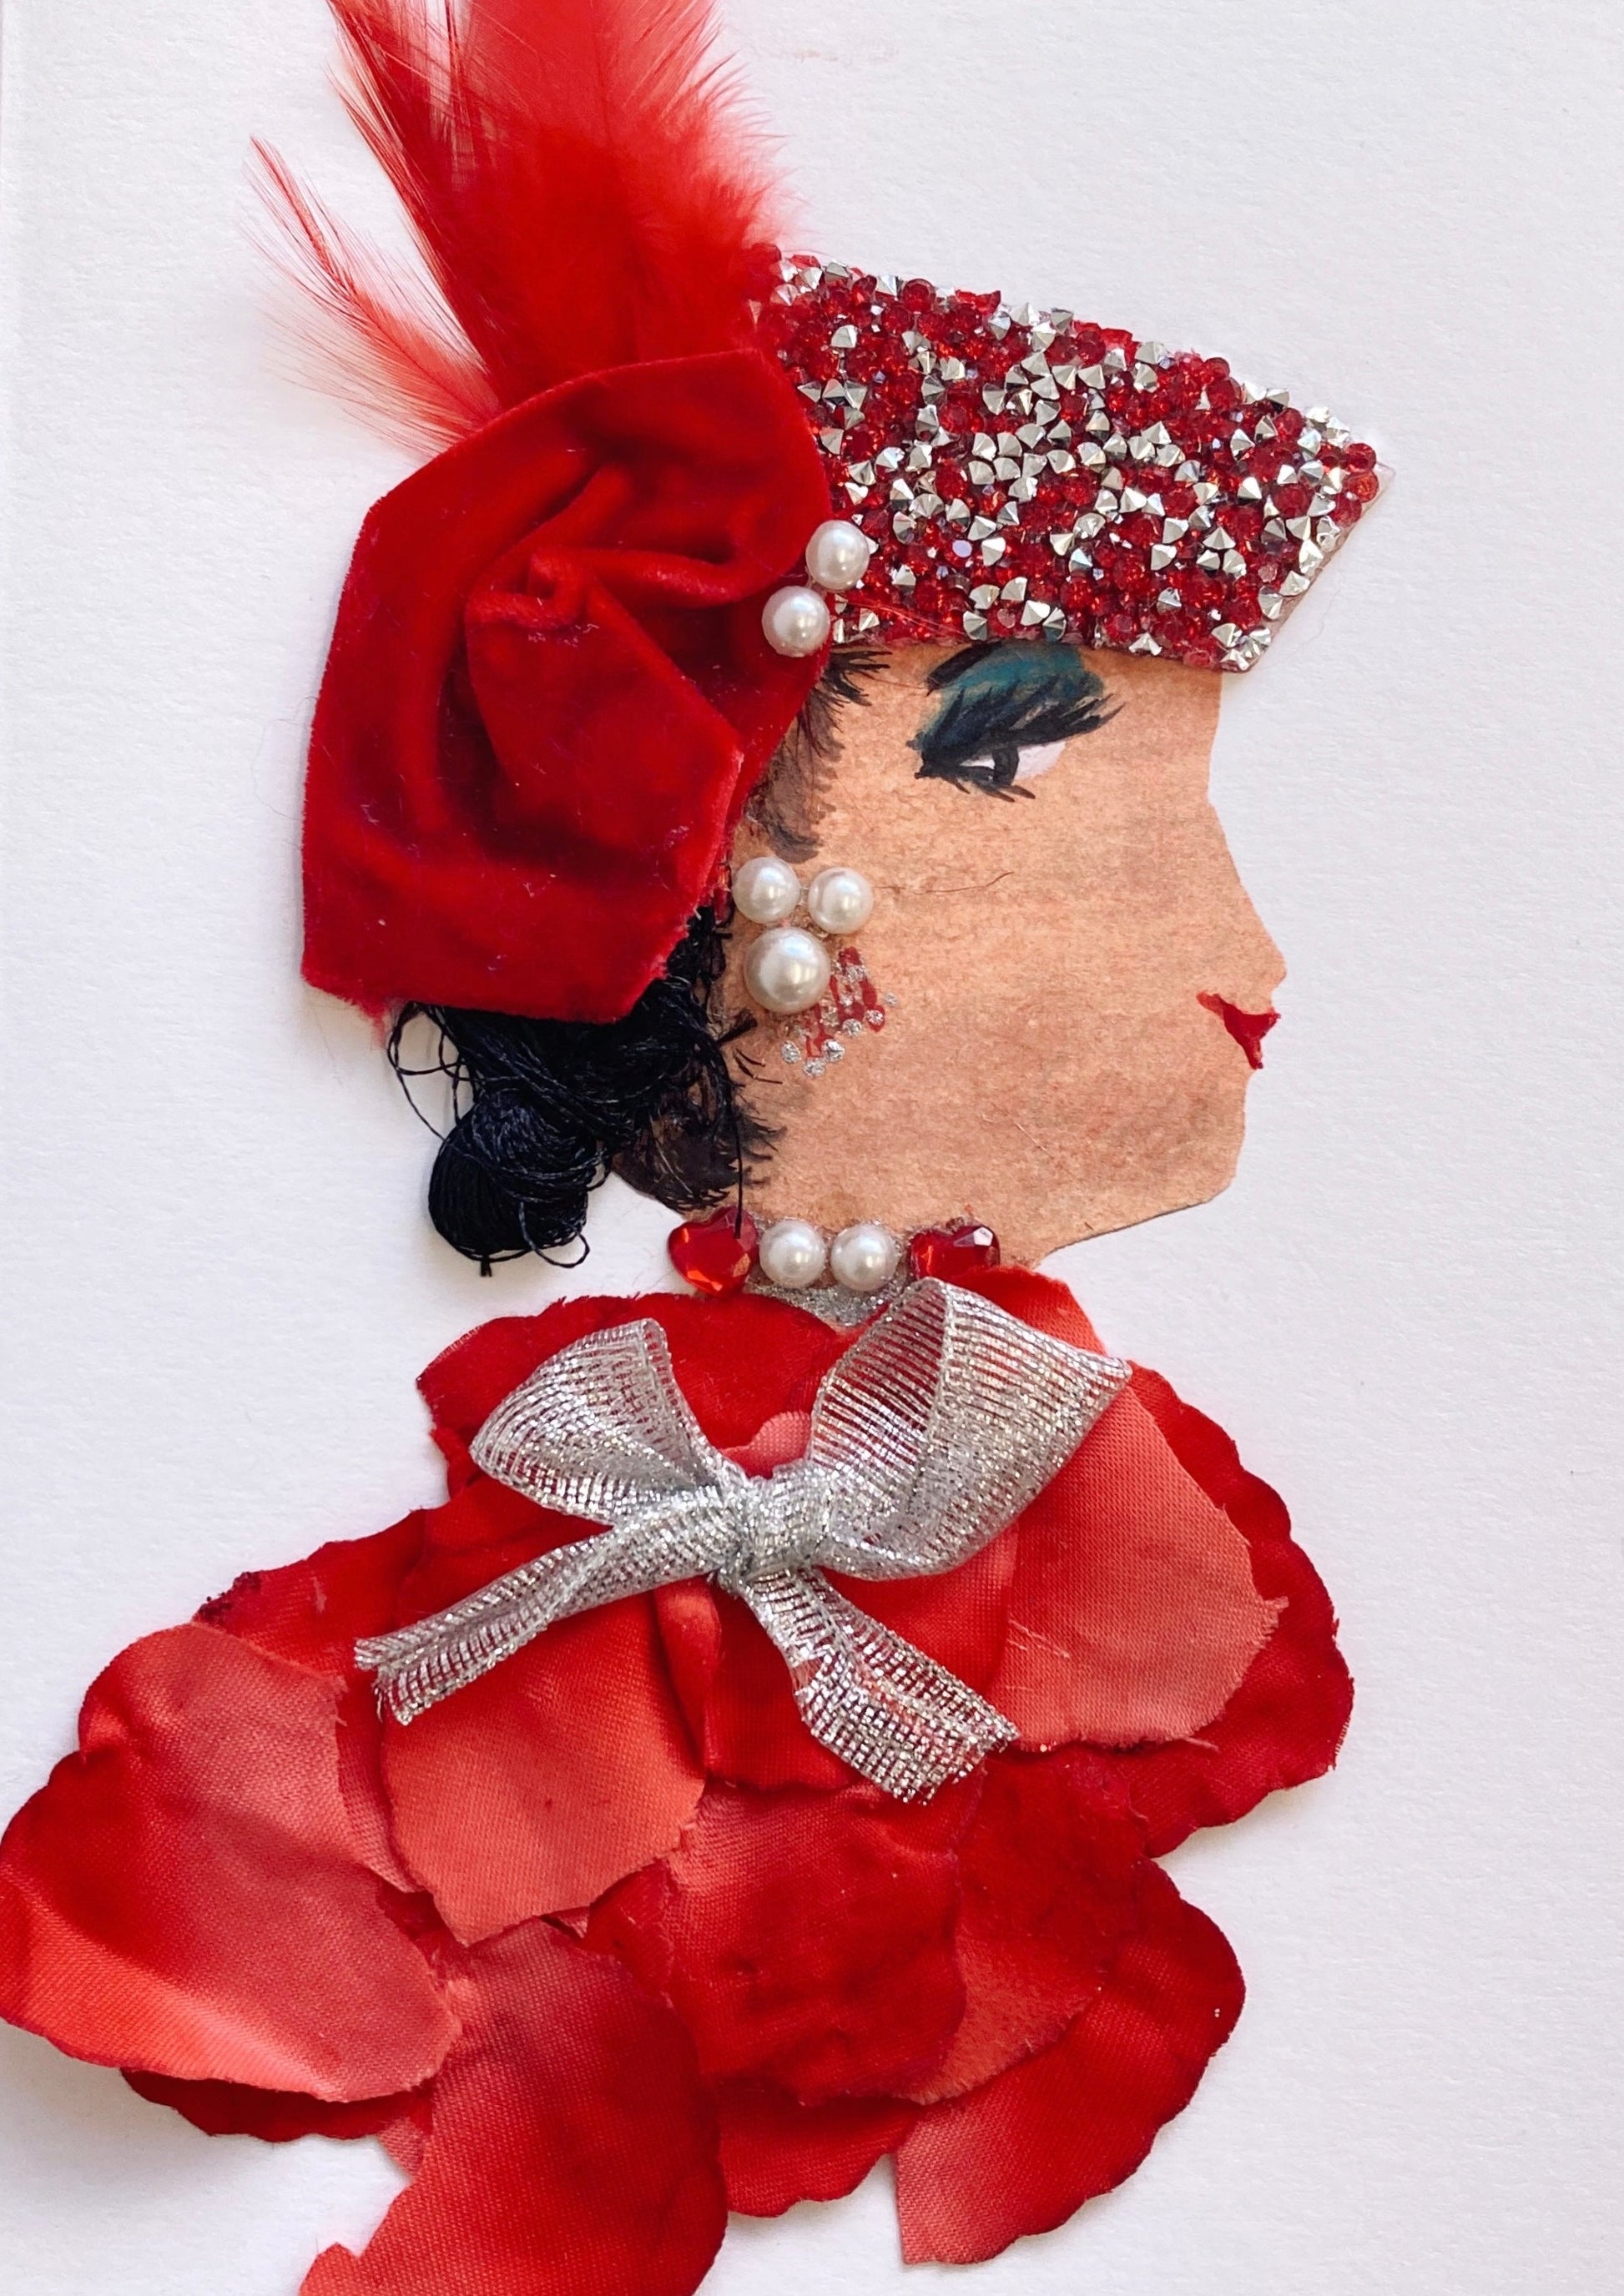 This card has been given the name Suzie. Suzie wears a red blouse made of fake flower petals, a silver bow around the neck, and a pearl necklace. She wears a headdress which has red and silver diamantés, a red feather, and some red velvet fabric. Her black curly hair peeks out of the bottom of the headdress. 